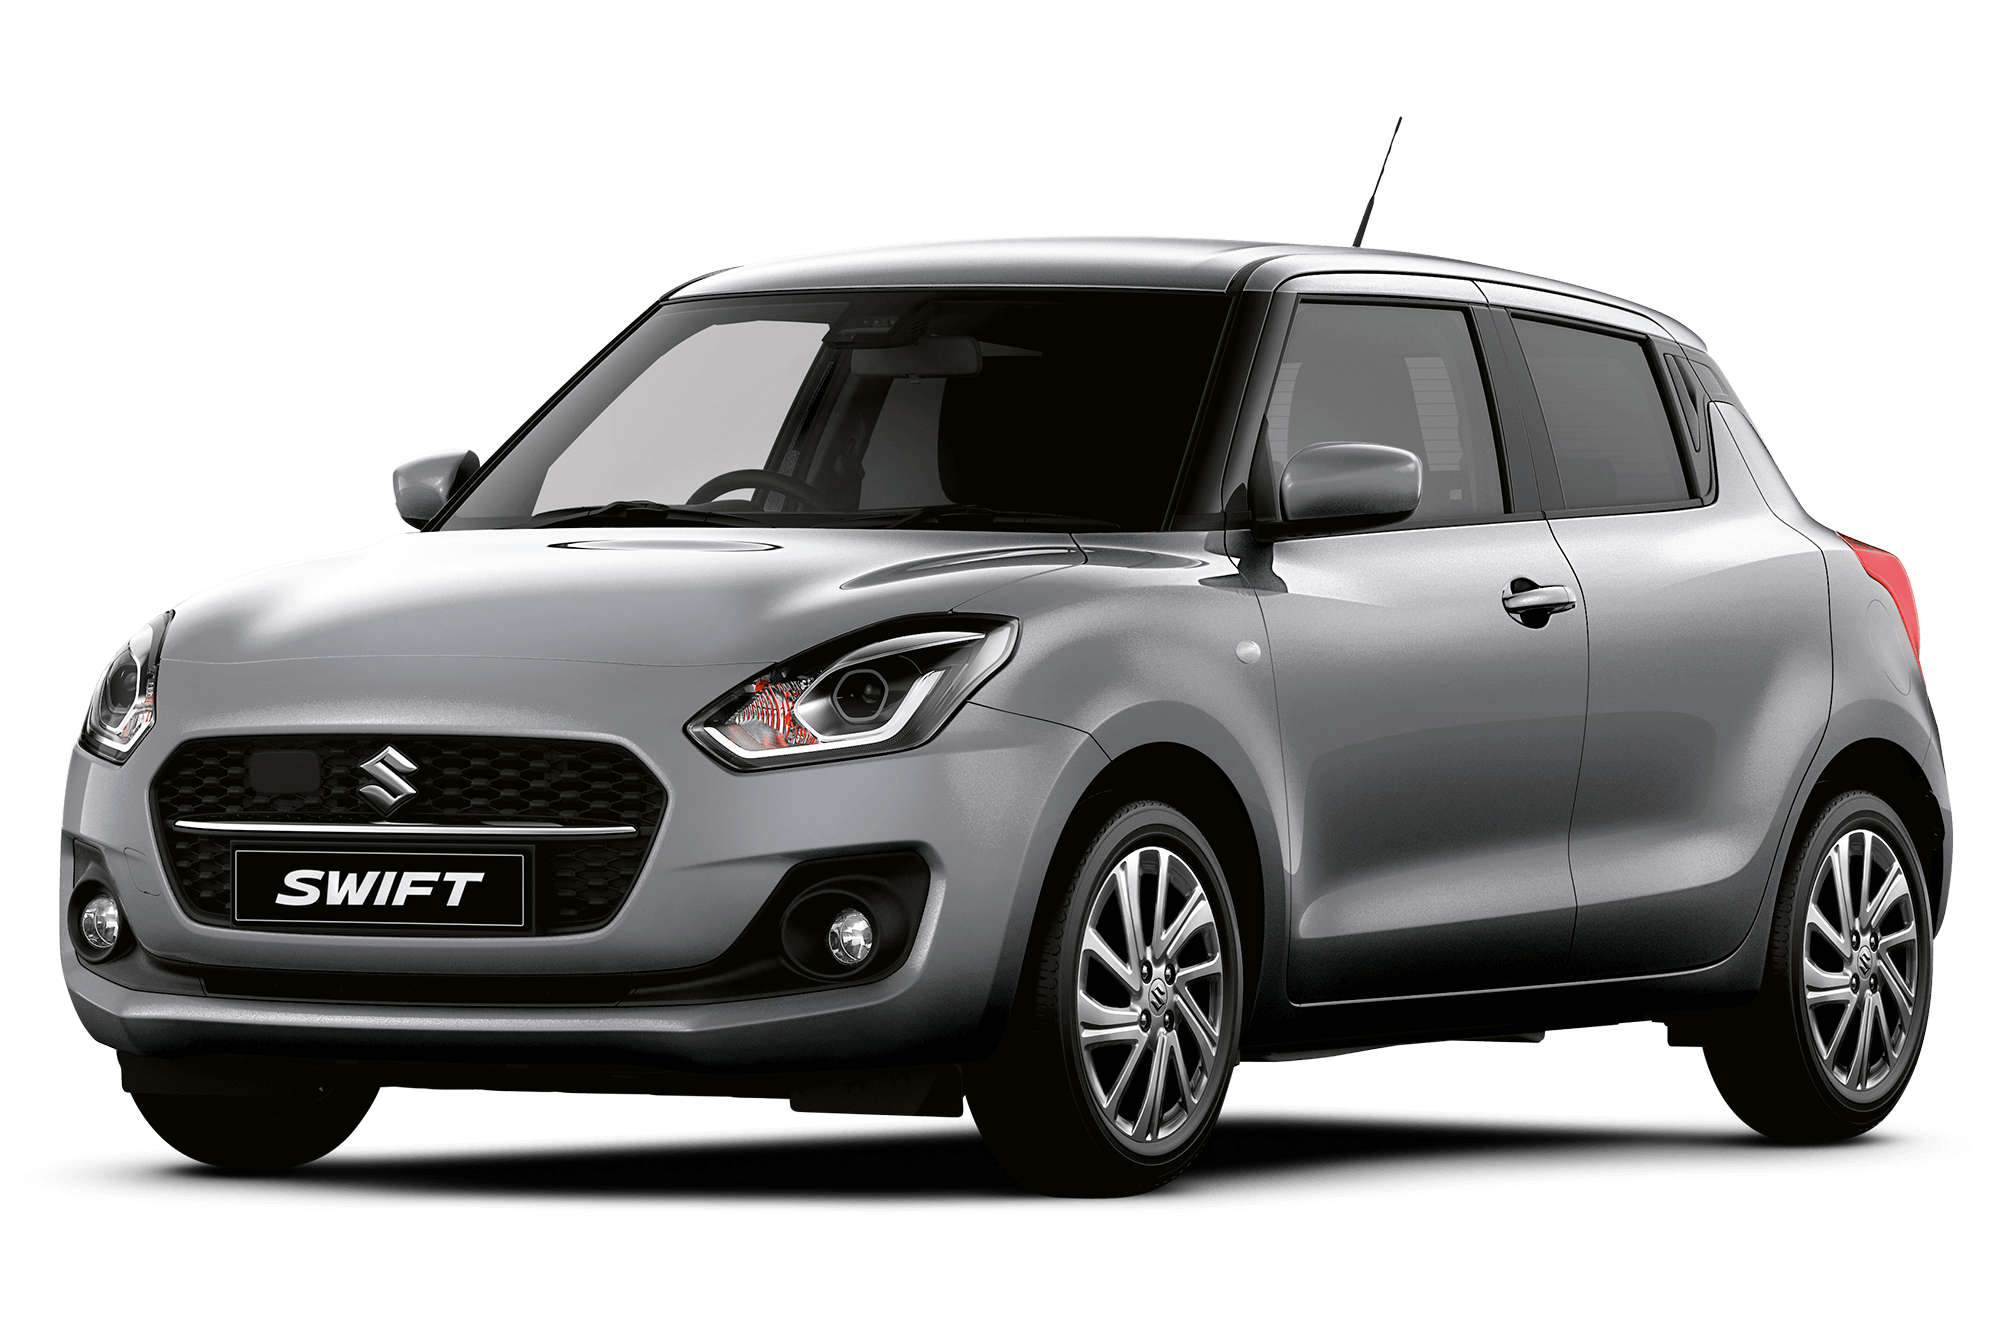 14x accessories for SUZUKI SWIFT and how to install it yourself